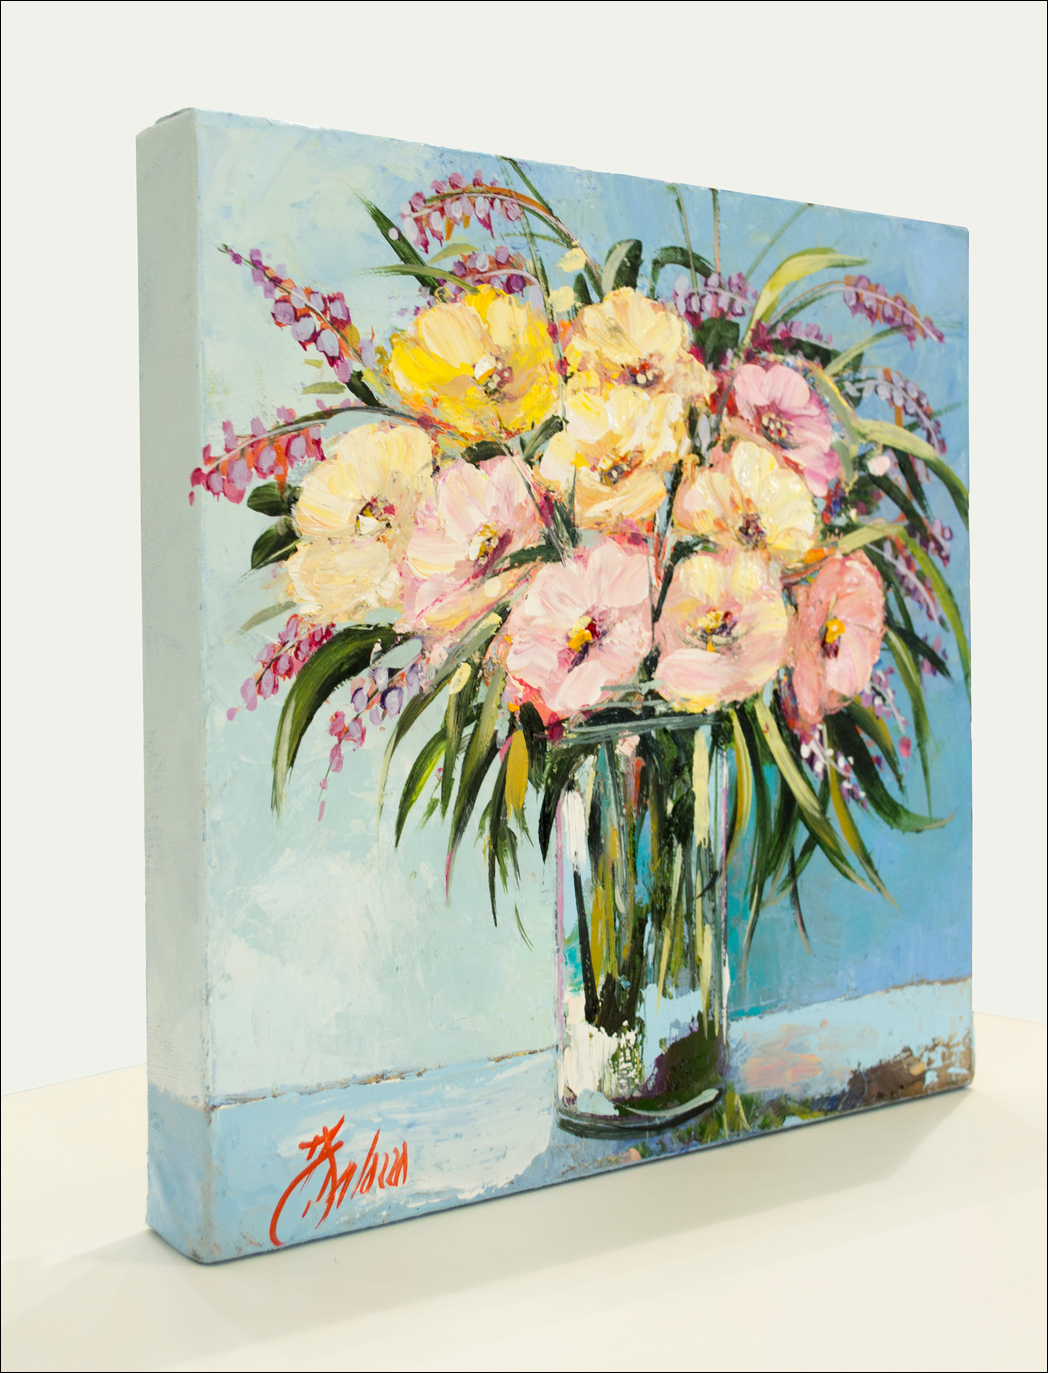 Left View Of Still Life Painting "Soft Pink Floral" By Judith Dalozzo